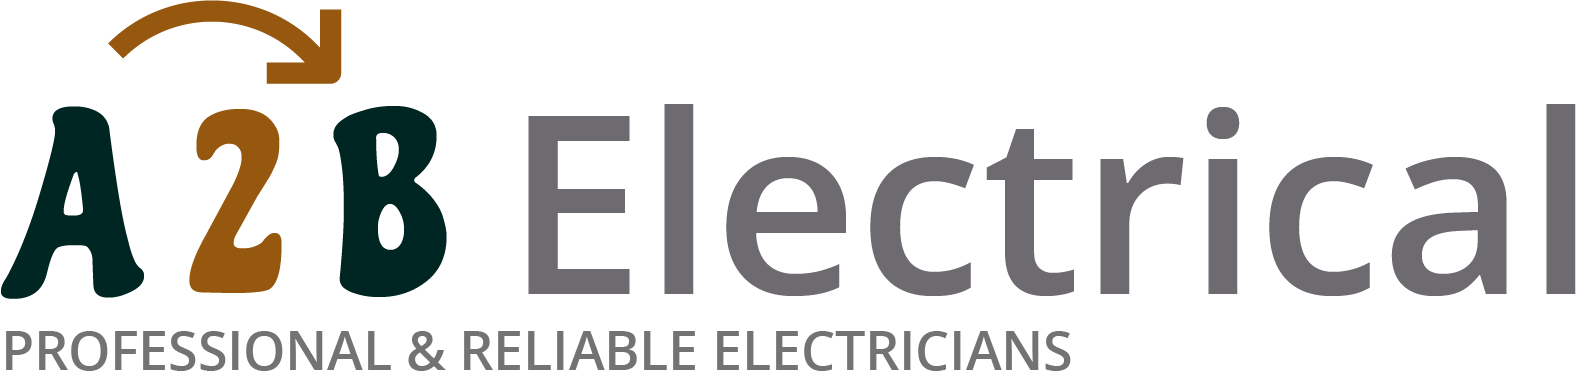 If you have electrical wiring problems in Belper, we can provide an electrician to have a look for you. 